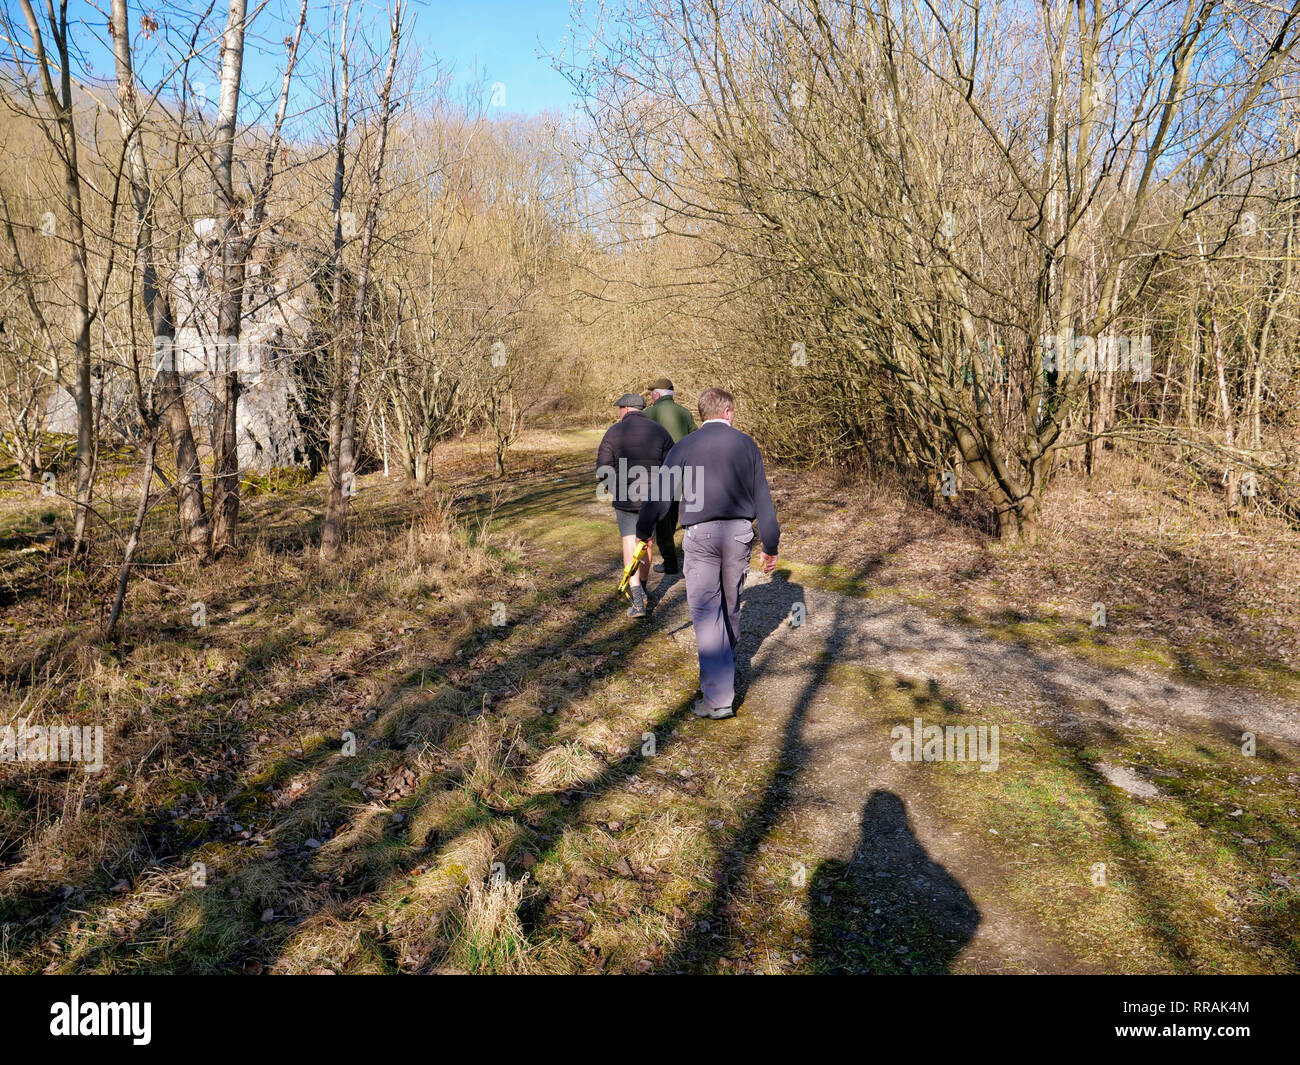 Wirksworth, Derbyshire, UK. 25th Feb, 2019.  Local beauty spot under threat by Gypsy Roma Traveller camp after Councillors from Derbyshire Dales District Council apologised to the residents of Wirksworth for having to make the decision, commenting that they 'wouldn't wish it on anyone', Councillor Mike Ratcliffe called that decision a 'partisan political manoeuvre', Stoney Wood, Wirksworth, Derbyshire Dales. Land has been allocated as a 6 month temporary tolerated site. DDDC plan to cut down all the trees on the site to make room for the Travellers camp. Credit: Doug Blane/Alamy Live News Stock Photo